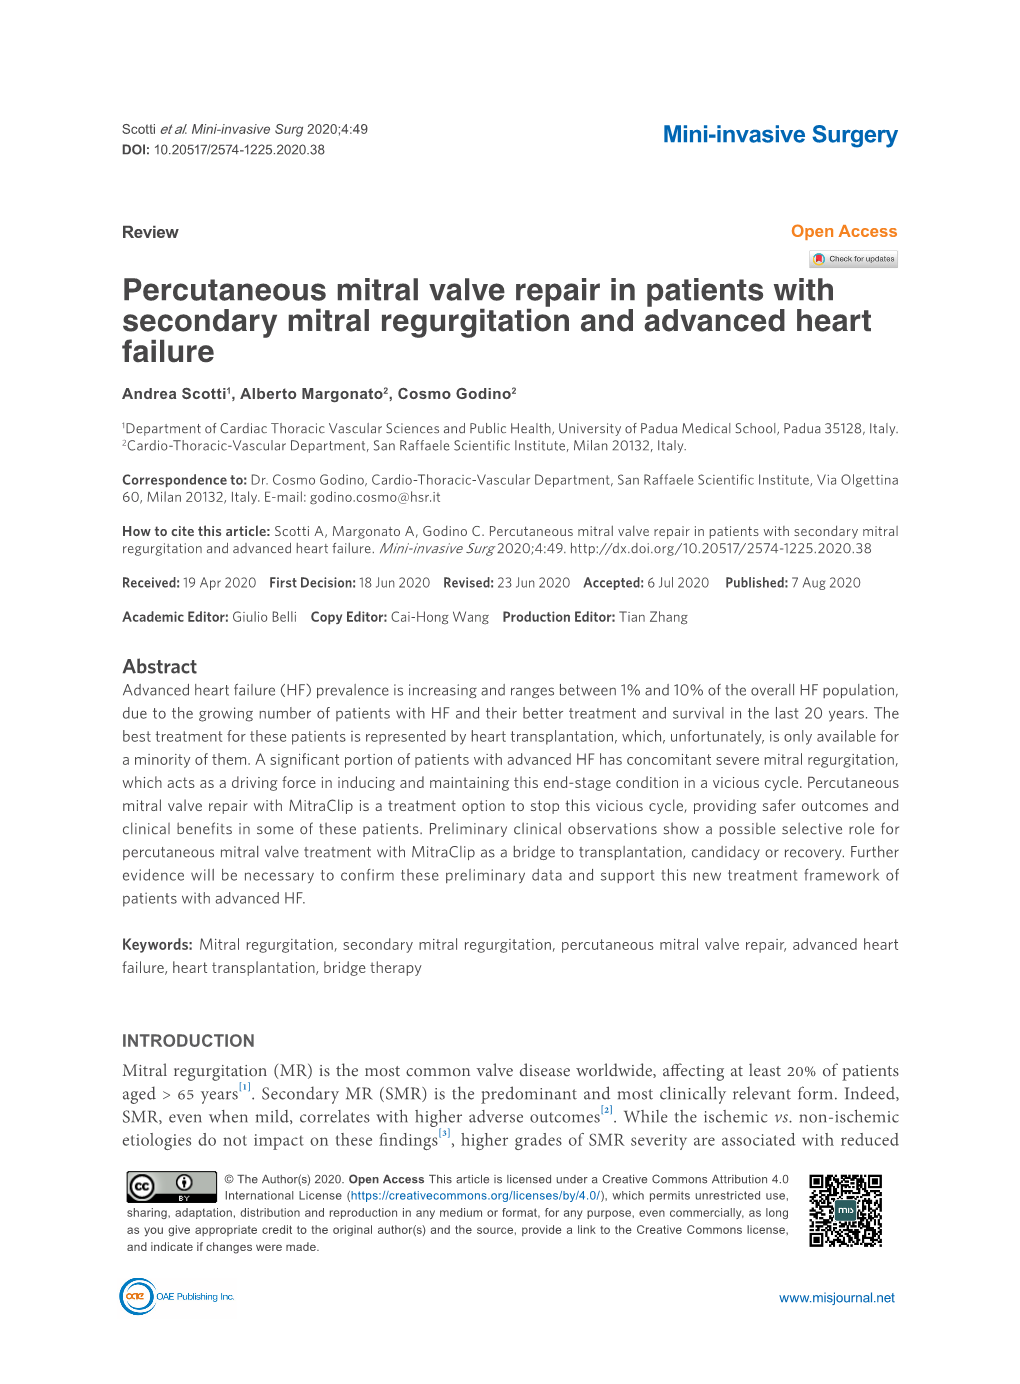 Percutaneous Mitral Valve Repair in Patients with Secondary Mitral Regurgitation and Advanced Heart Failure